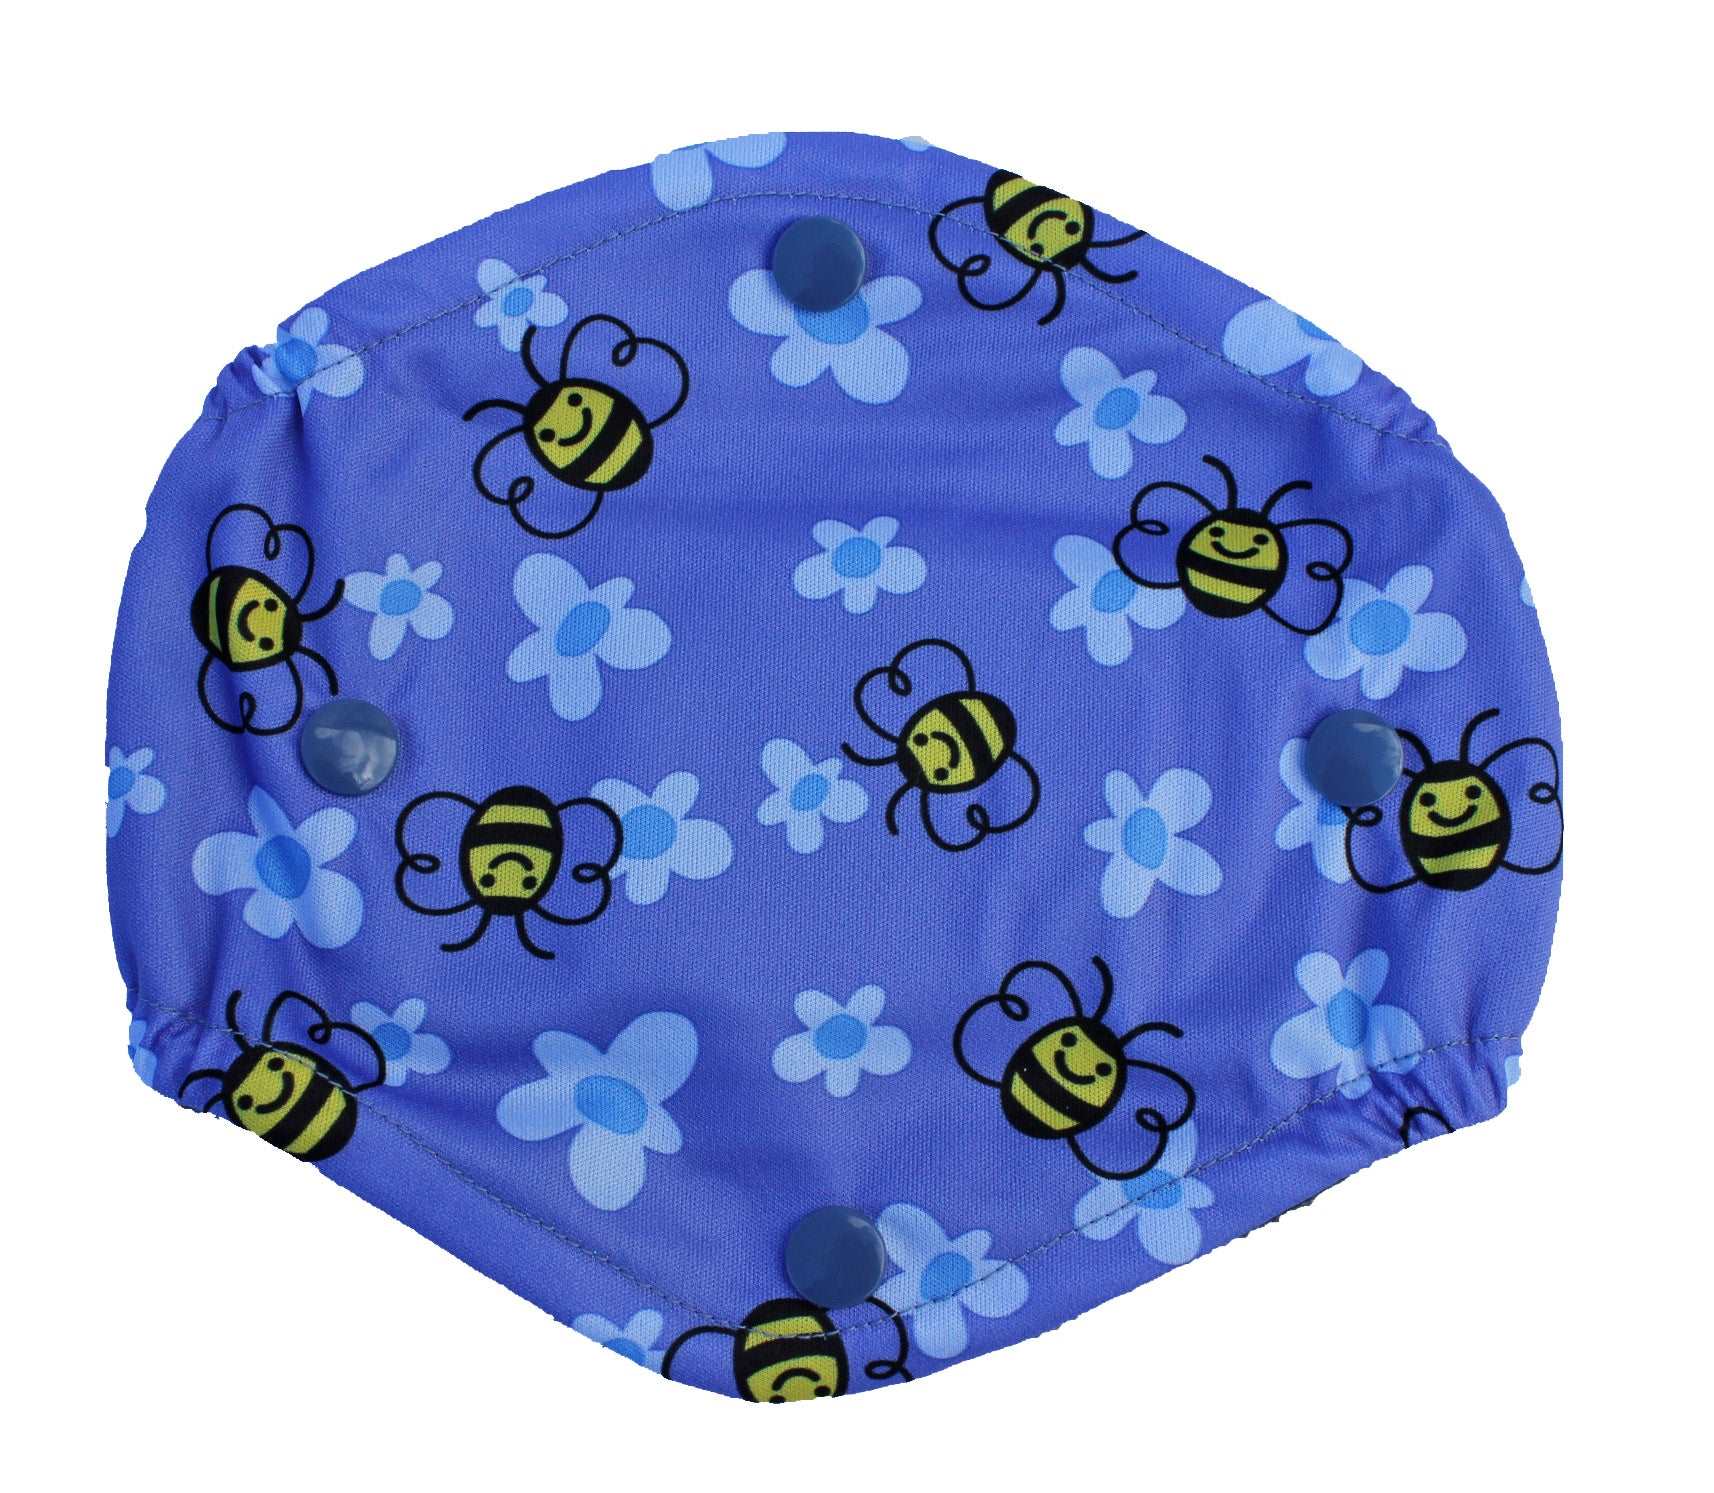 Buzzy Bee Diamond Male Dog Belly Band